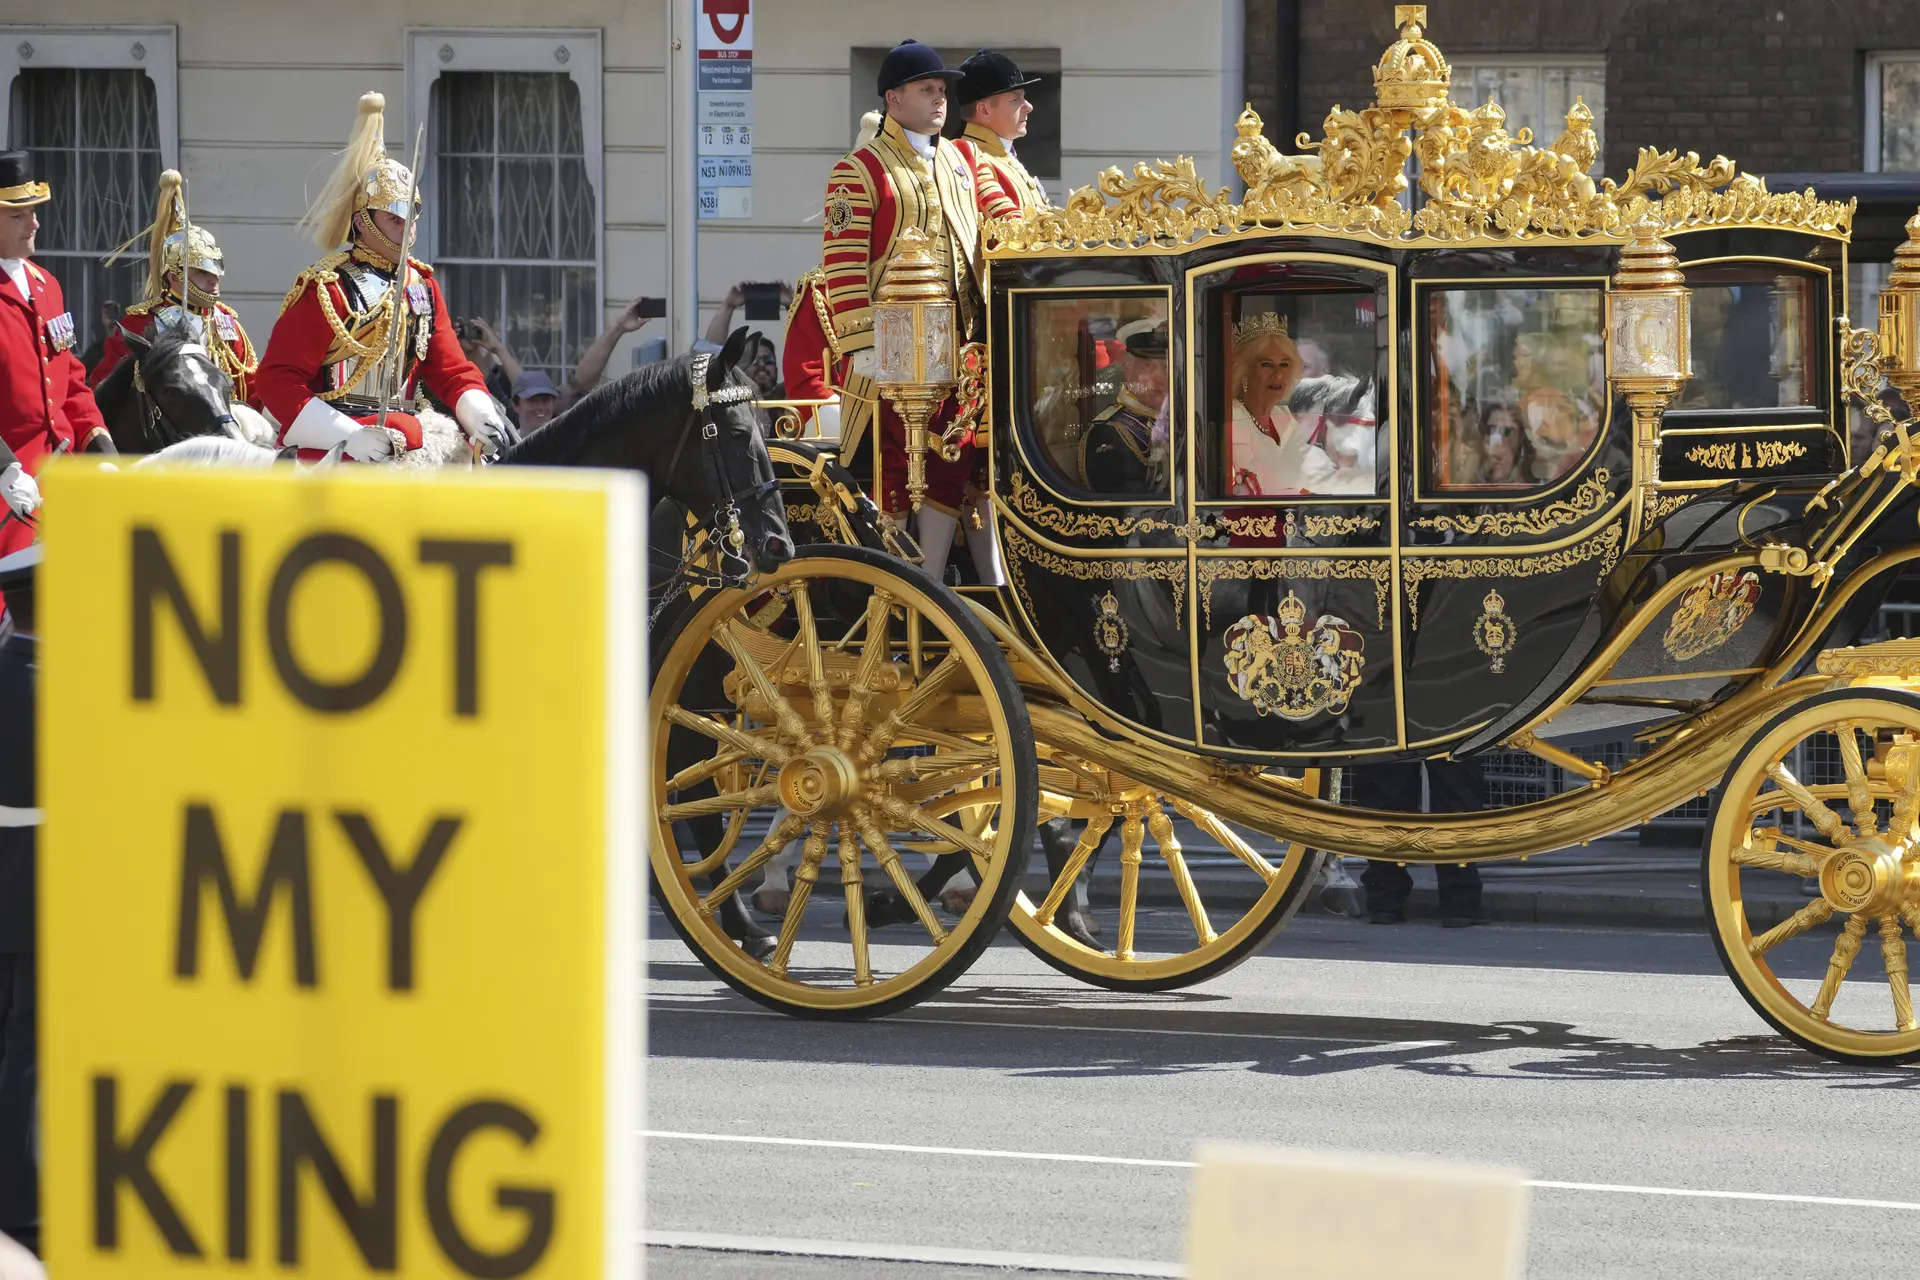 The King's Speech: A guide to the new UK government's proposed laws 